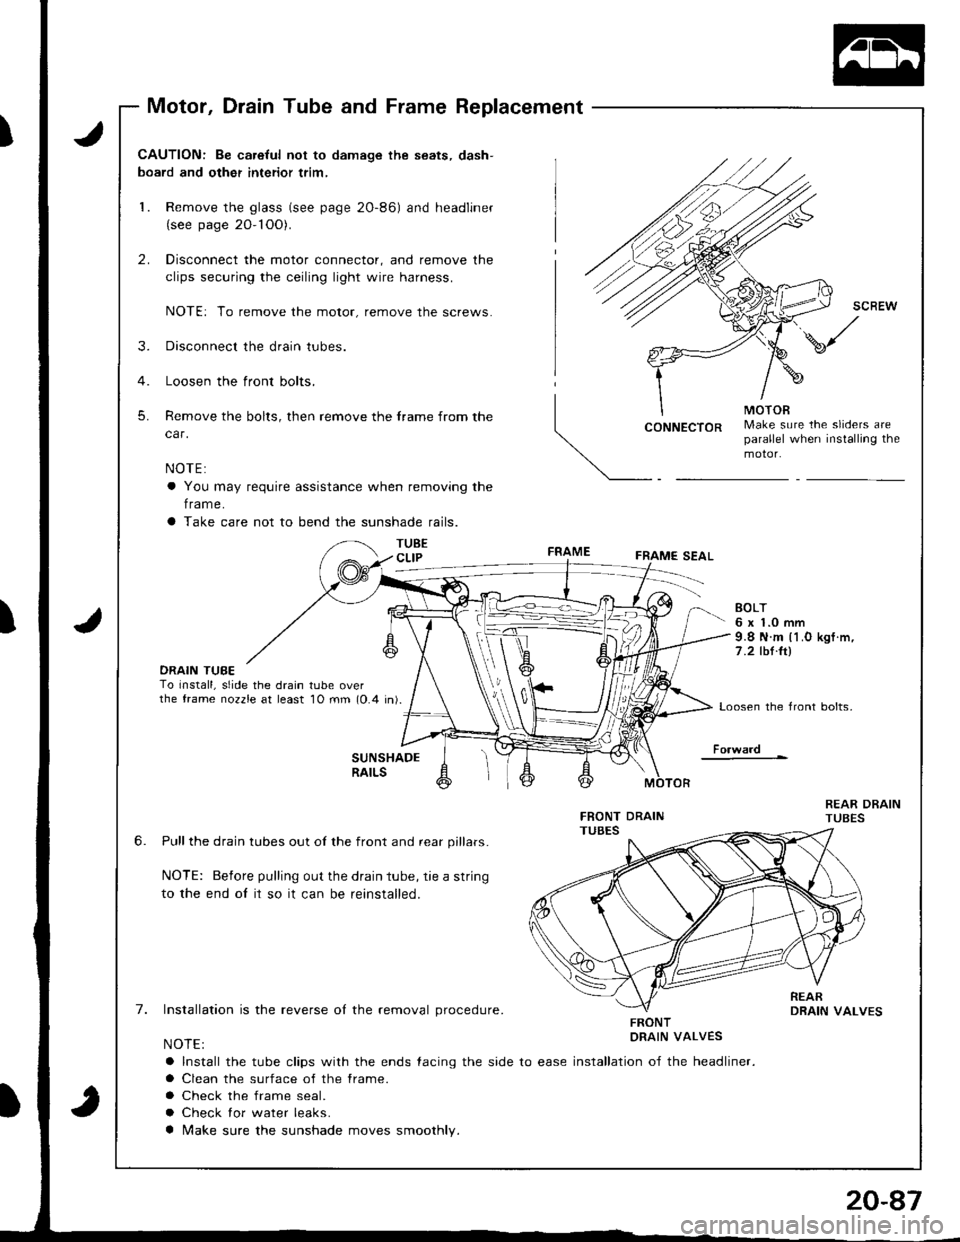 HONDA INTEGRA 1998 4.G Workshop Manual Motor, Drain Tube and Frame Replacement
J
J
CAUTION: Be ca.eful not to damage the seats, dash-
board and other interior trim,
1. Remove the glass (see page 2O-86) and headliner(see page 20- 1OO).
2. D